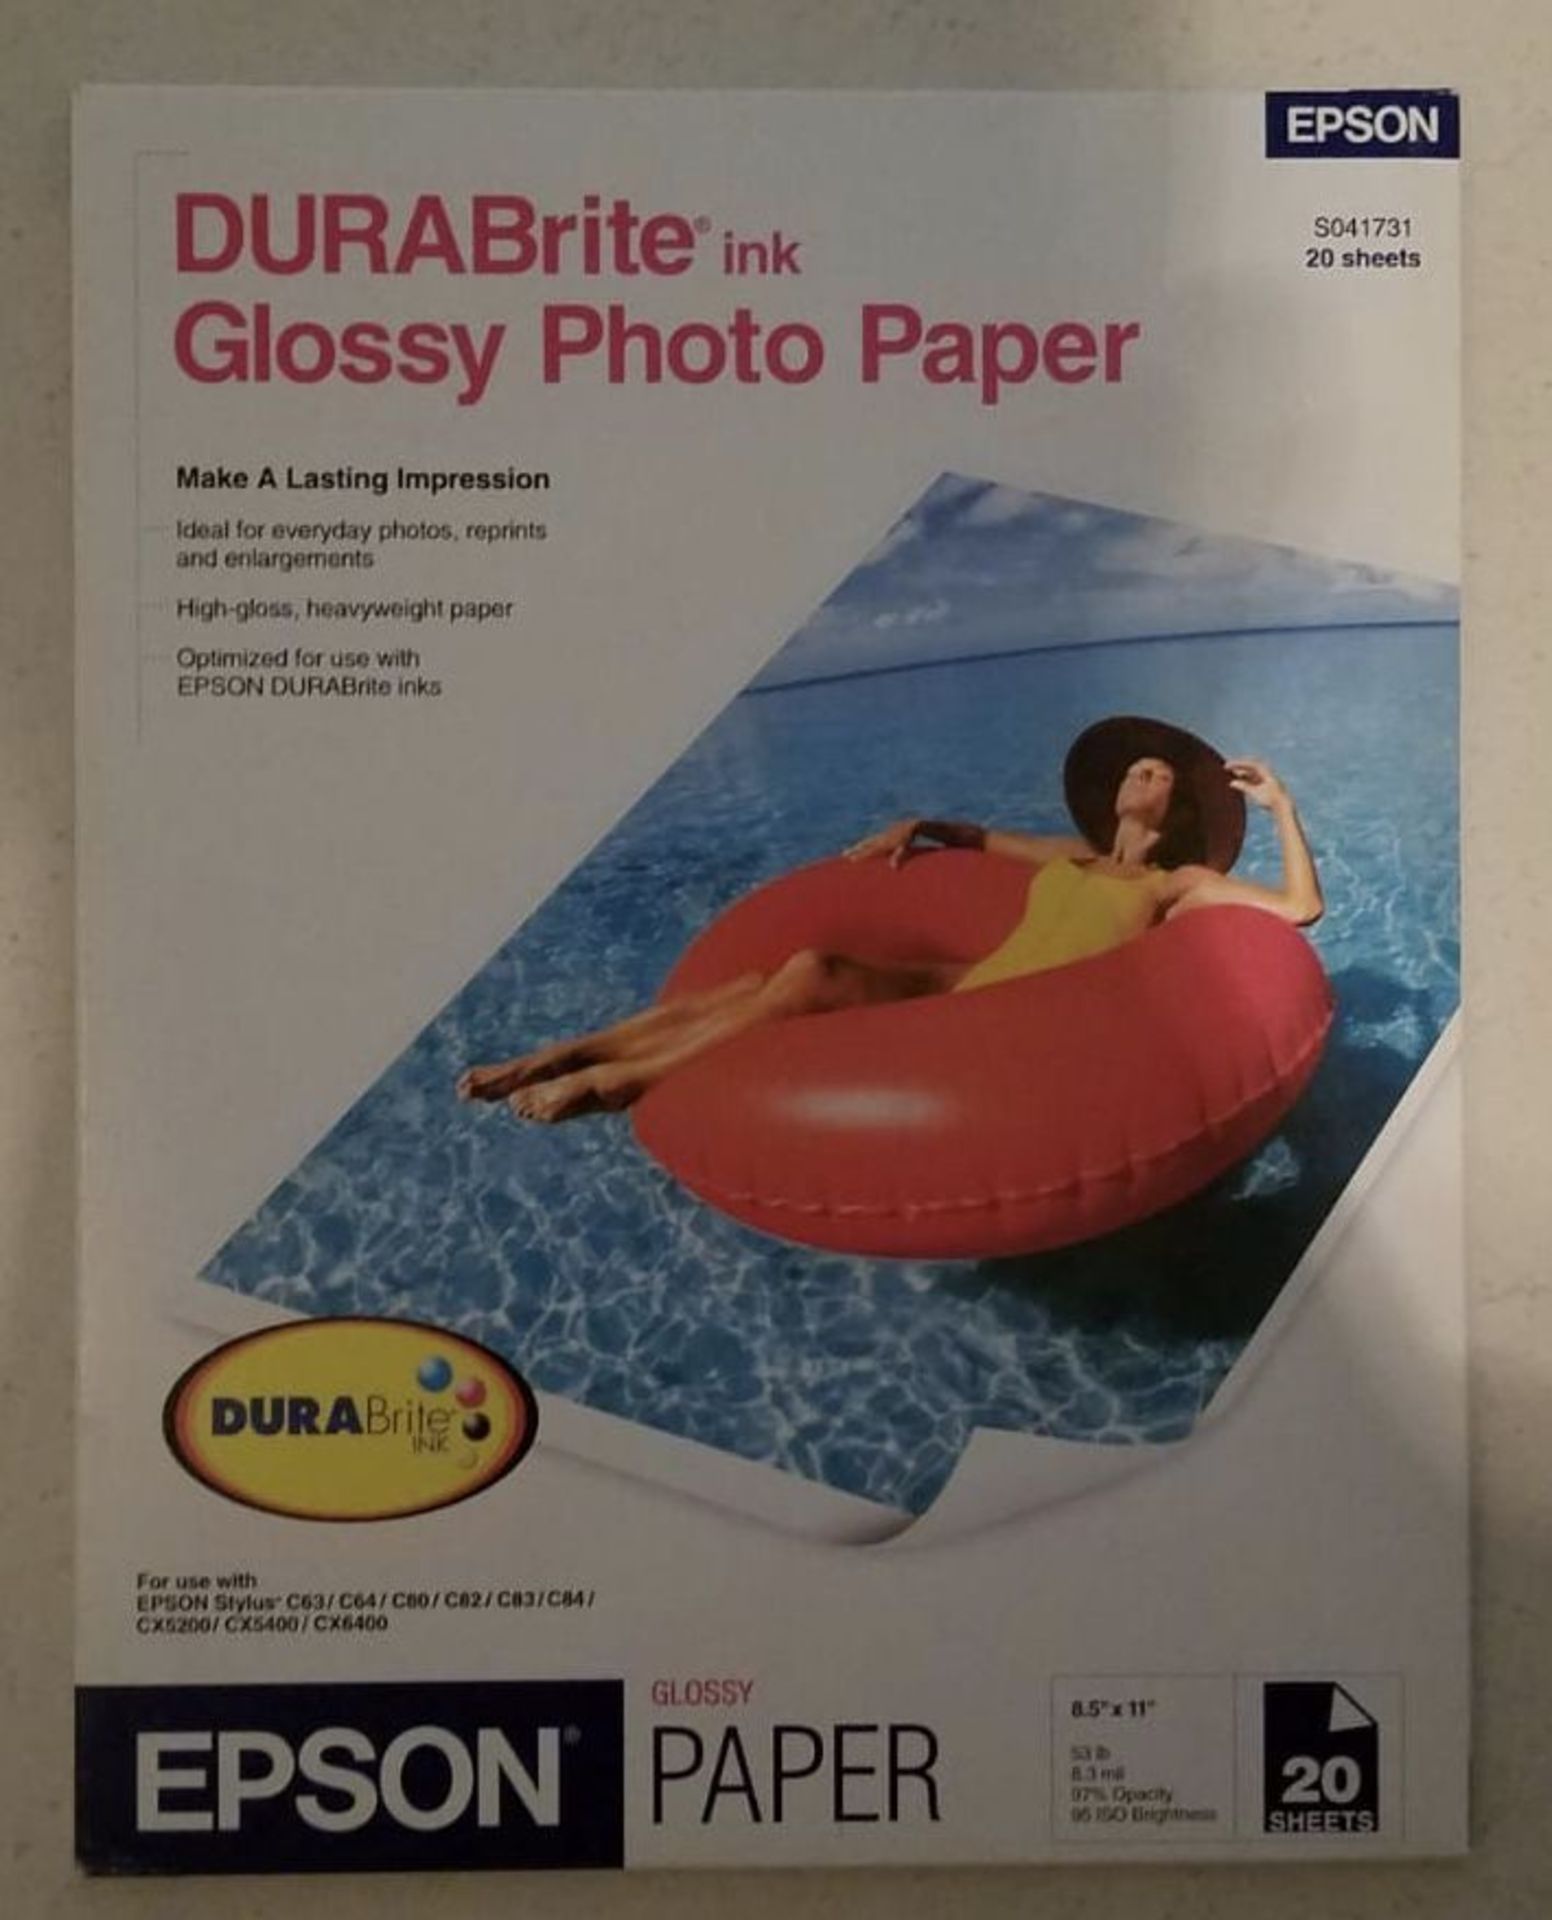 410 Packs of Epson DURABrite Glossy Photo Paper 8.5x11", All new, Case packed **For pick up or